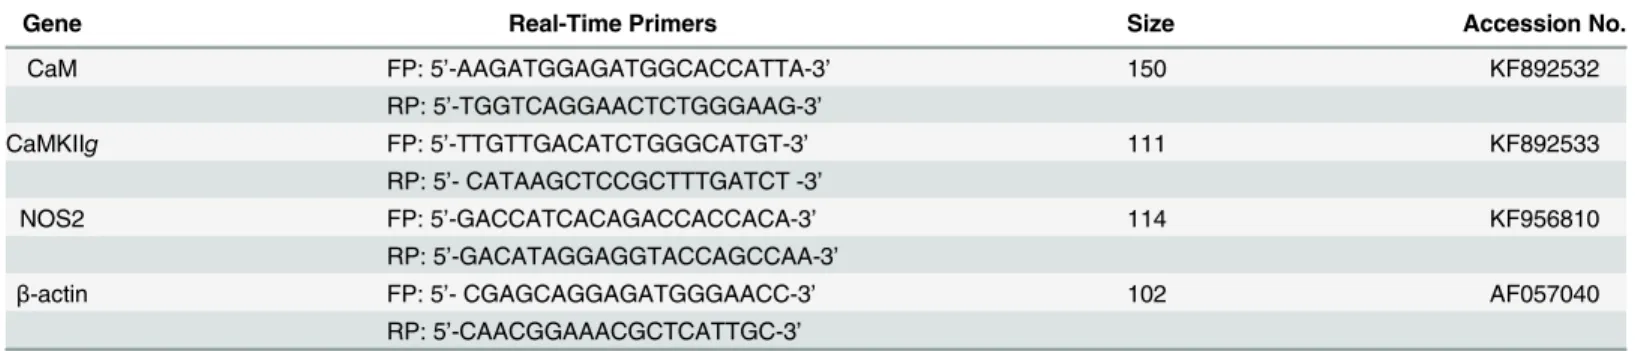 Table 3. Real-time primers for qPCR.